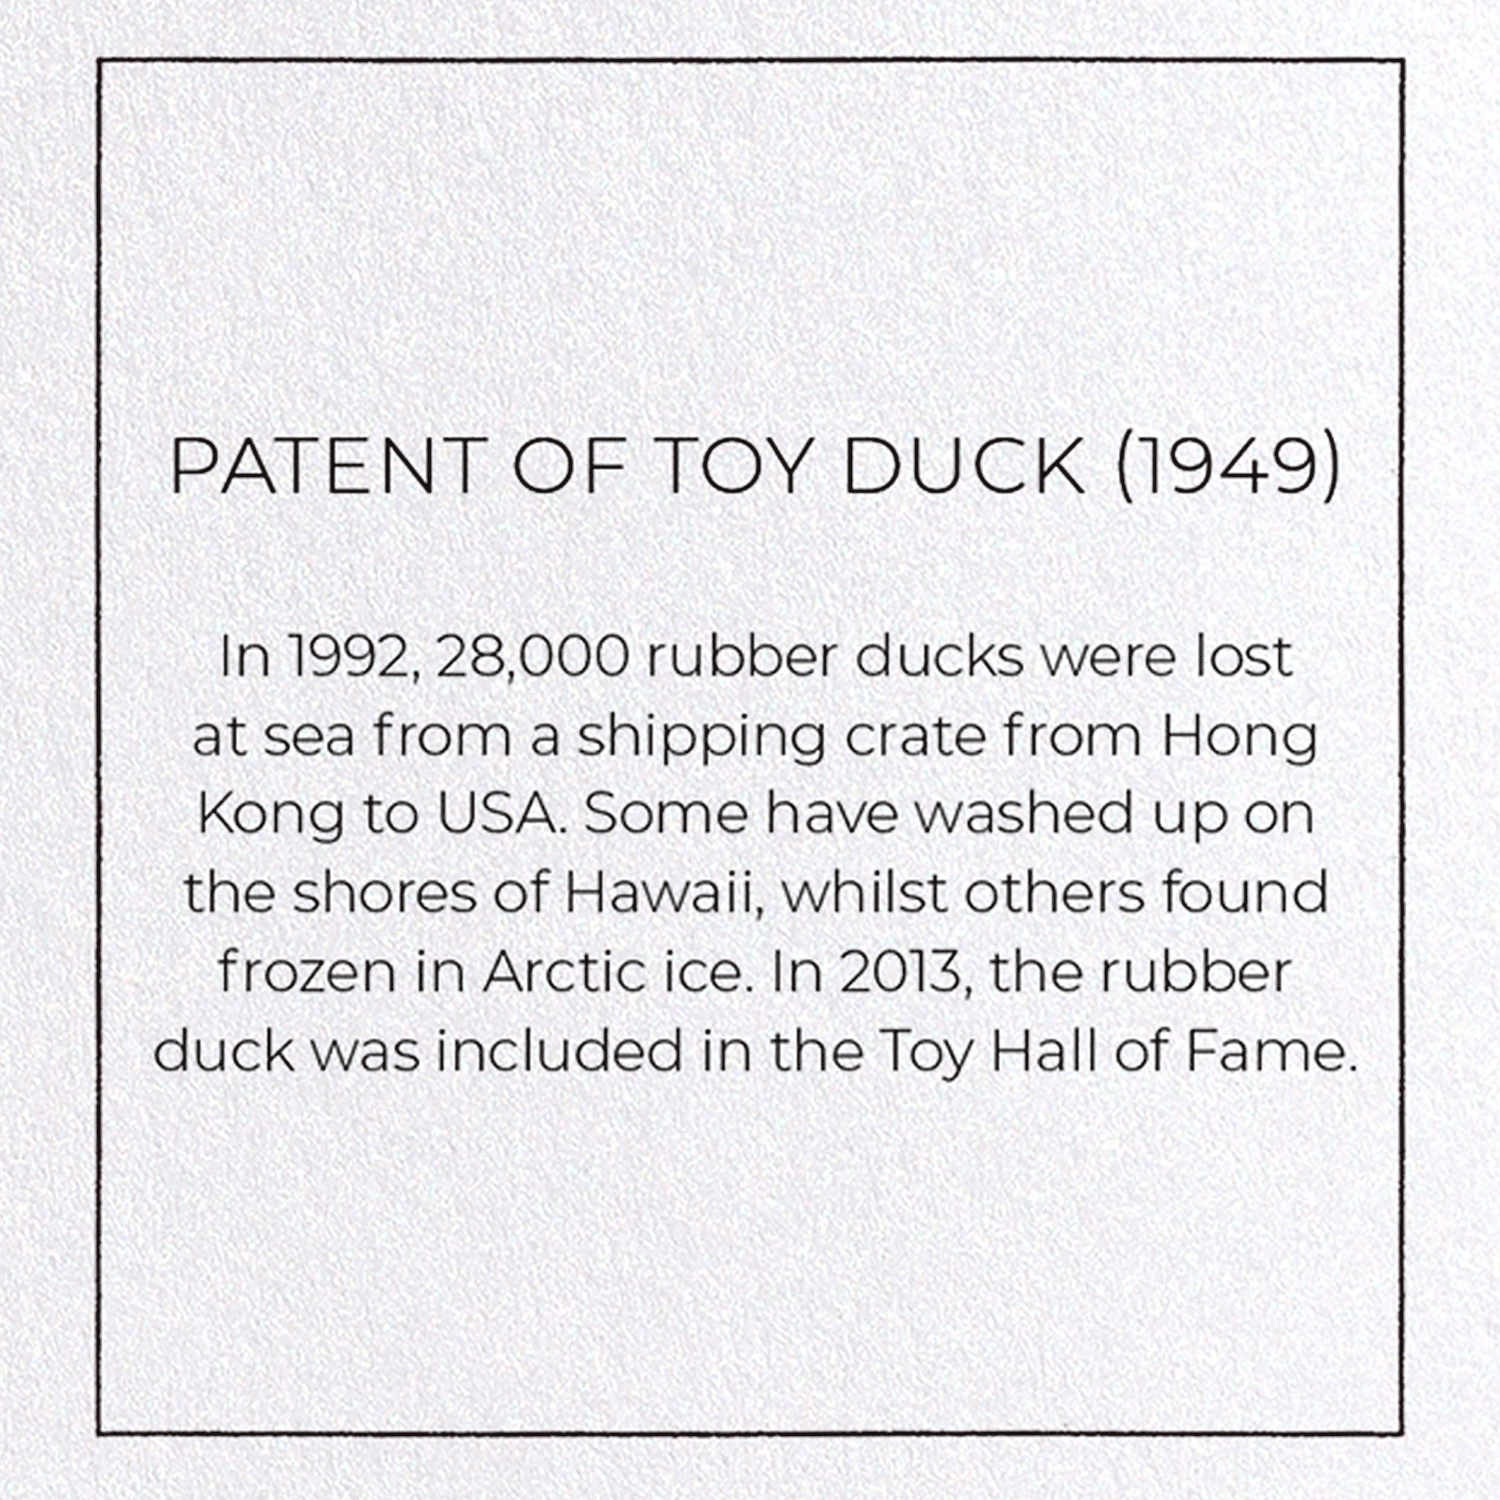 PATENT OF TOY DUCK (1949)